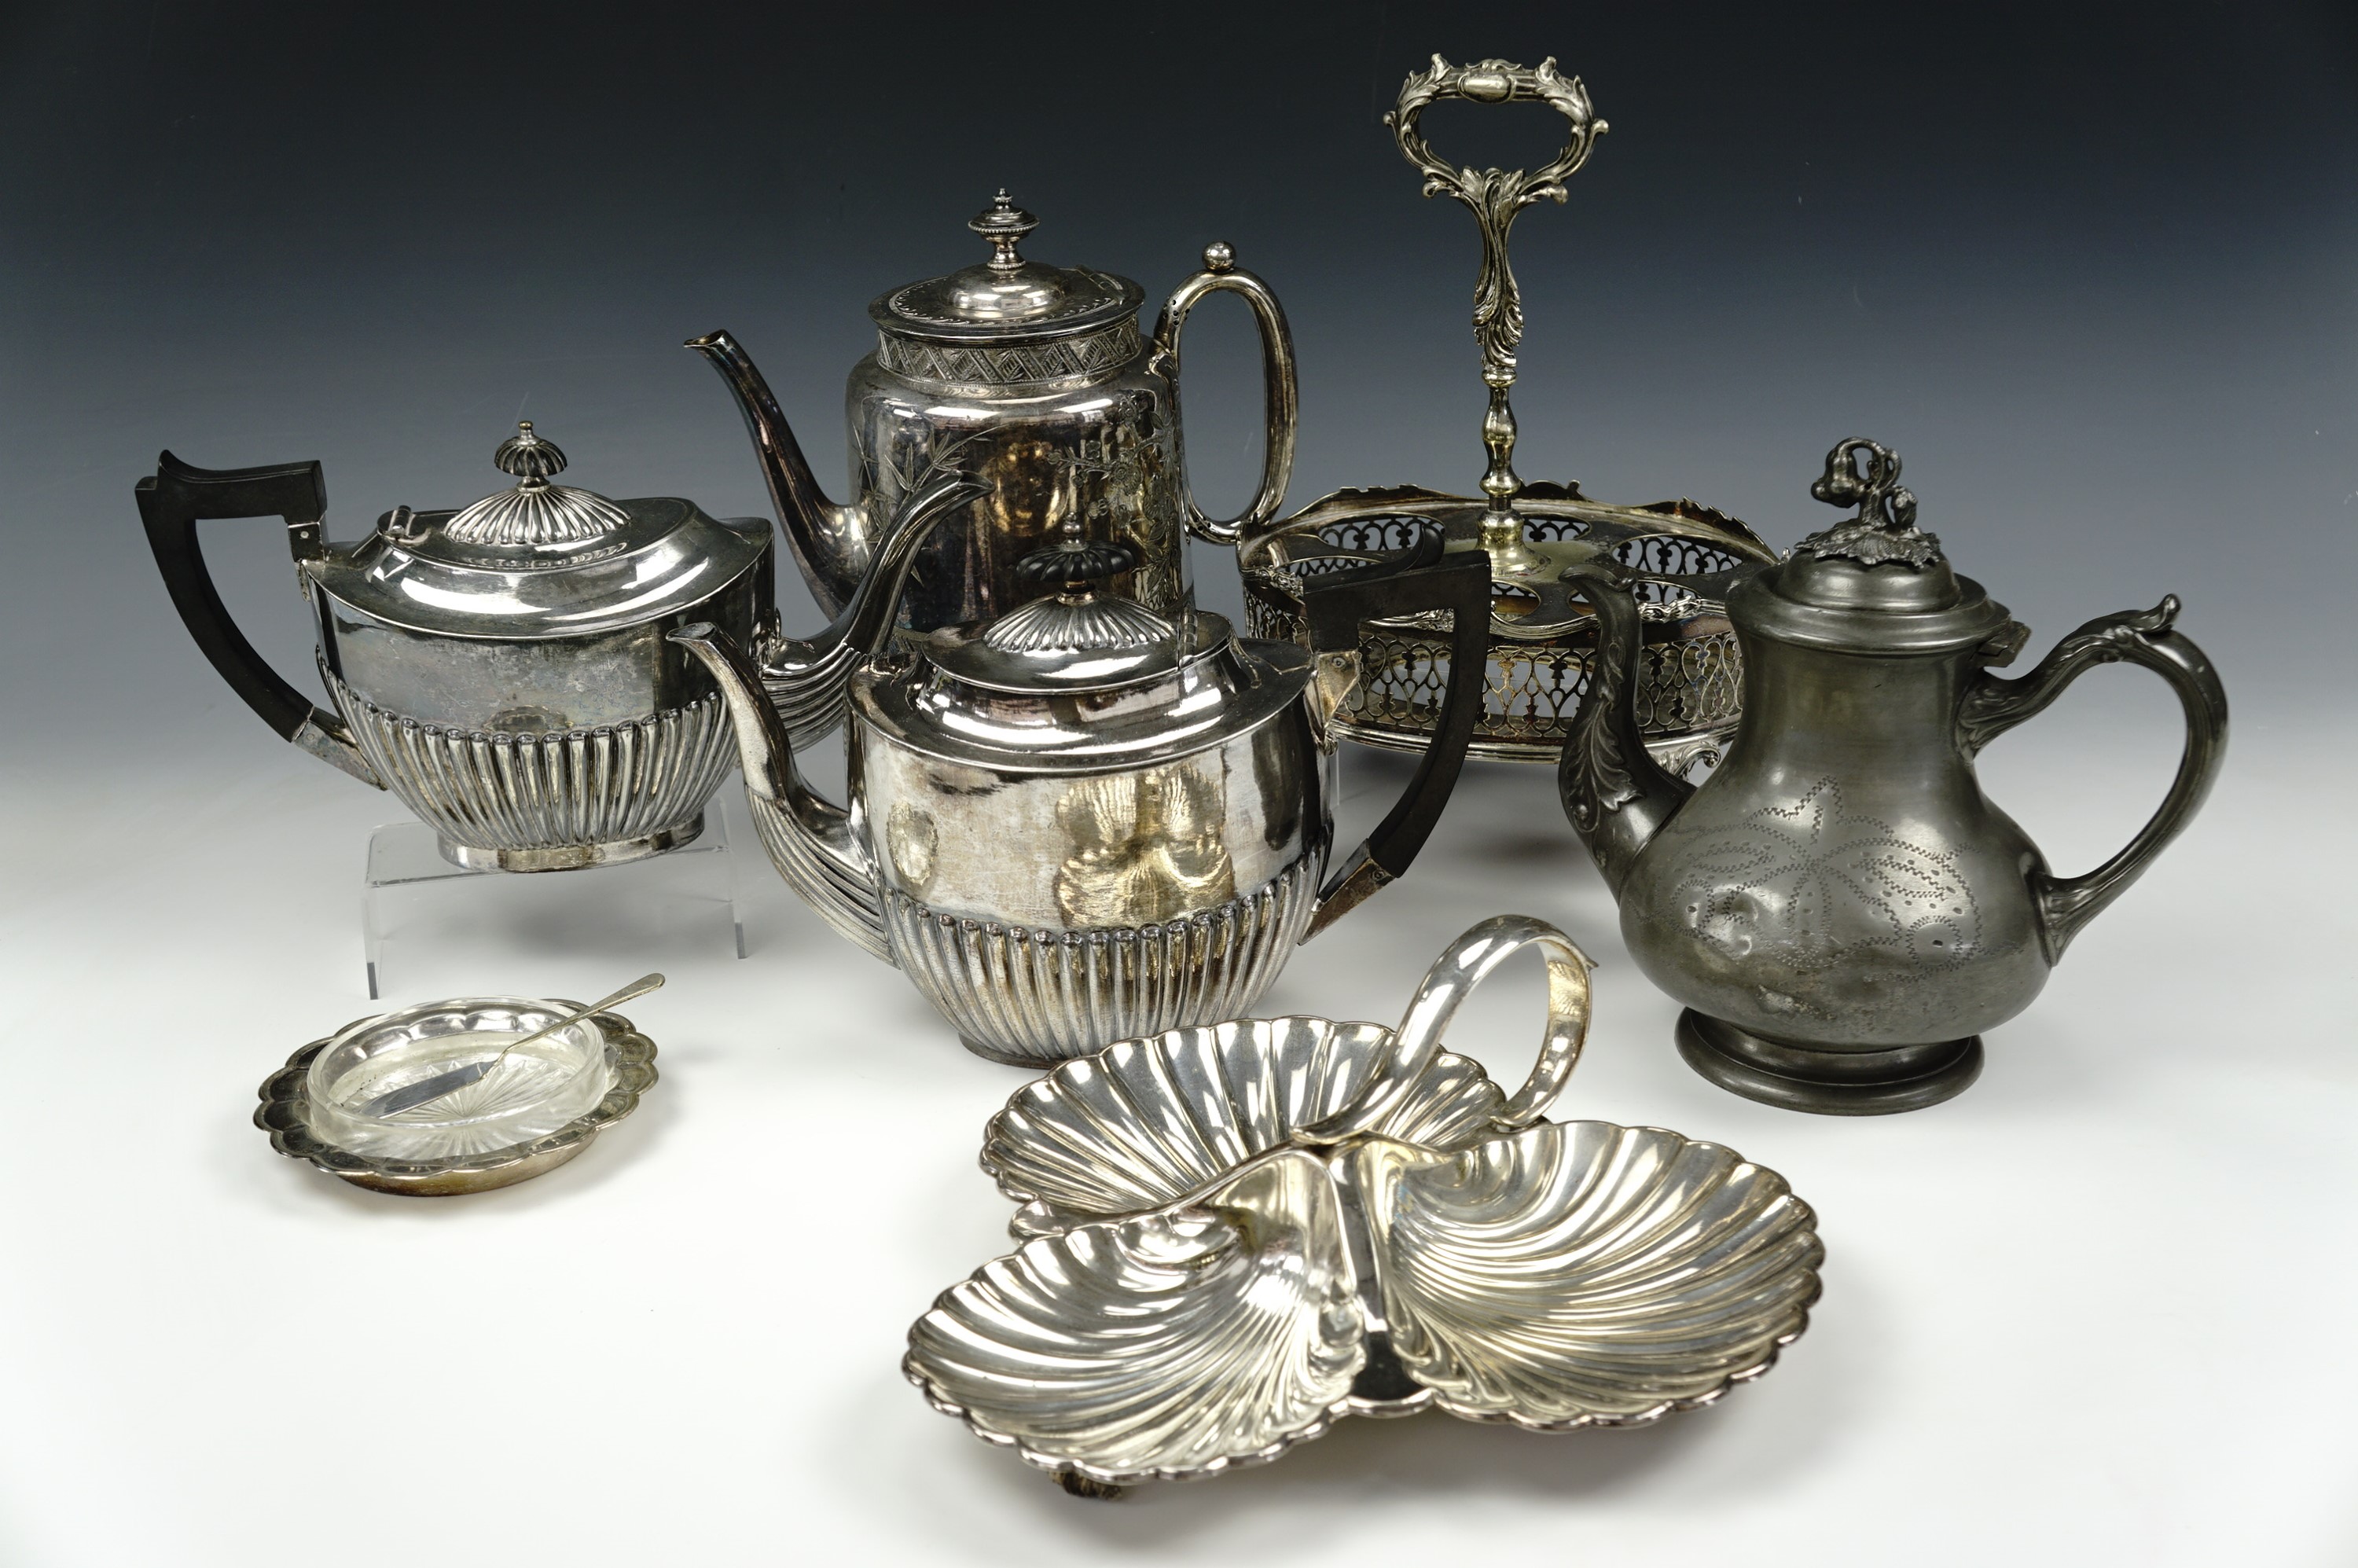 A quantity of electroplate including three teapots, an EPBM tea pot, butter dish etc